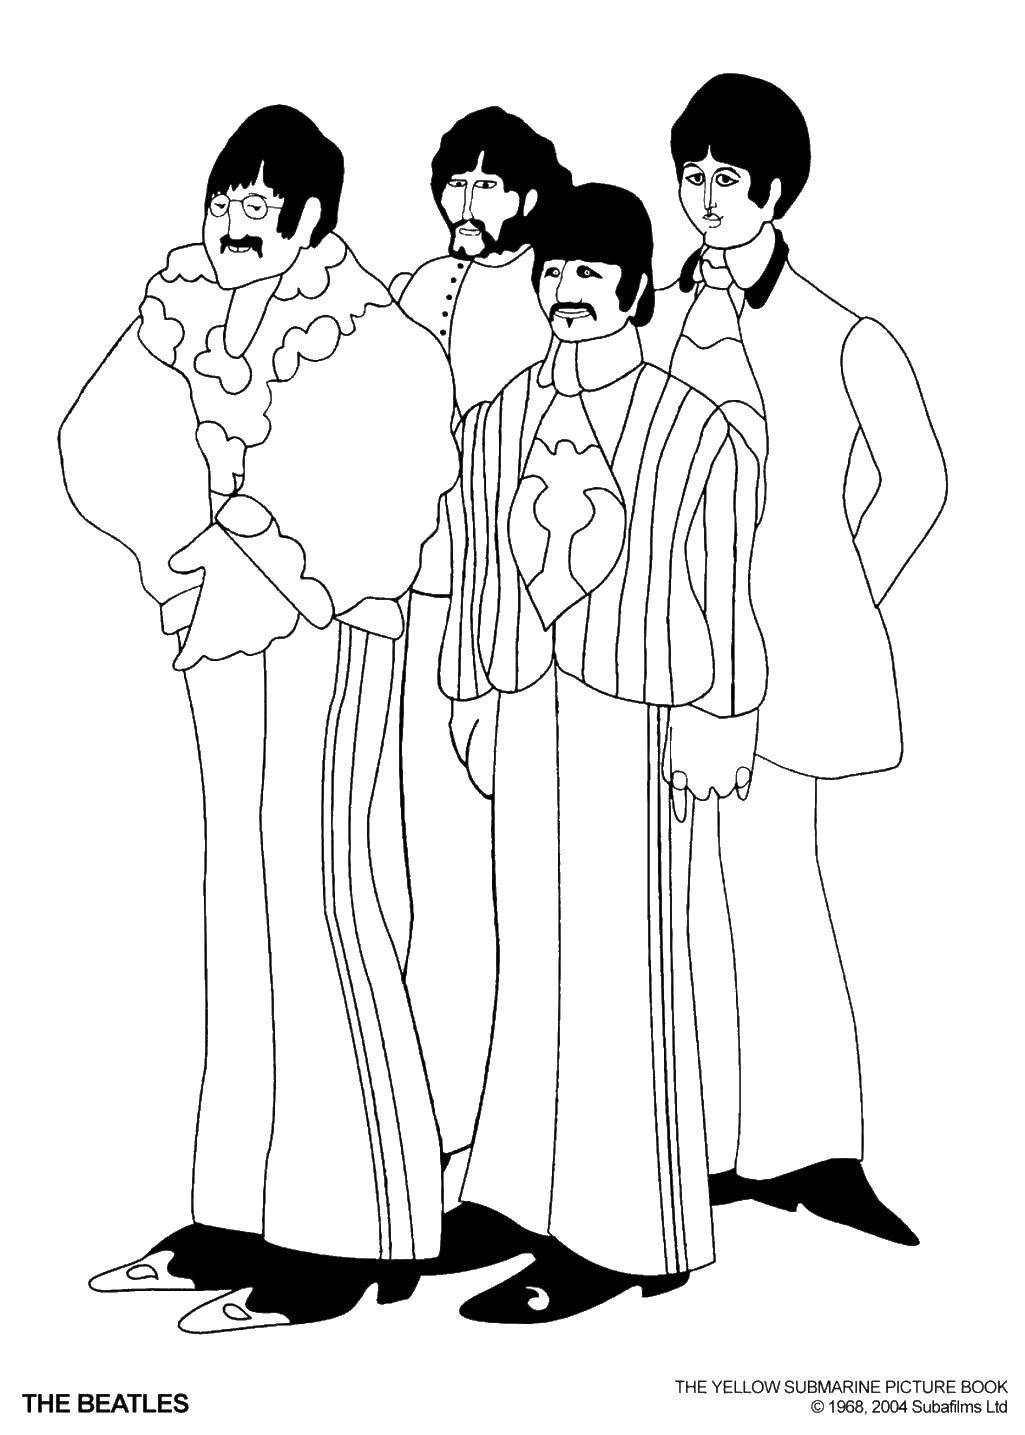 Coloring The band the Beatles. Category coloring. Tags:  Beatles, band, celebrity.